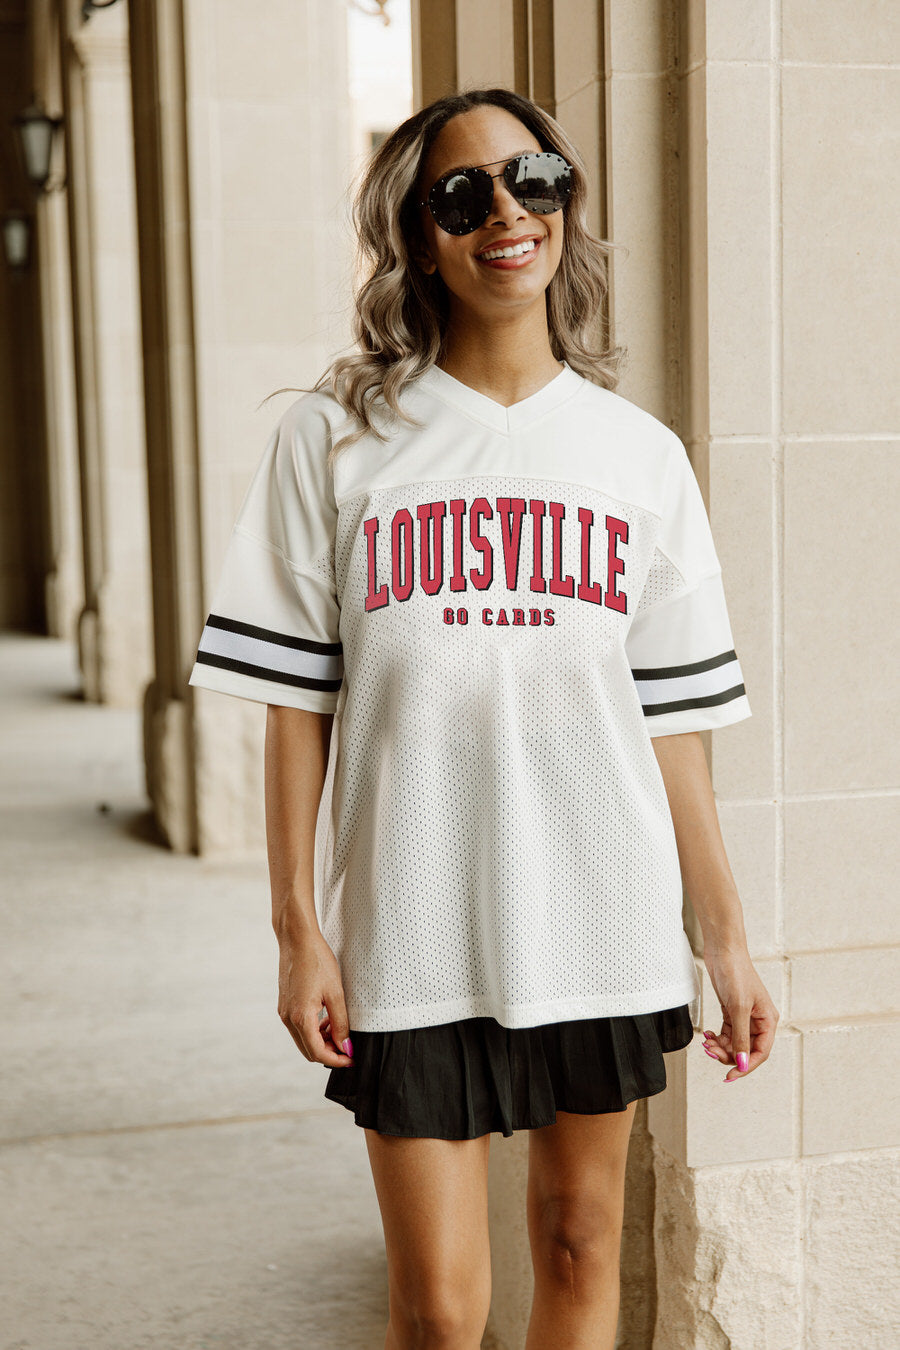 Girls Youth Gameday Couture Gray Louisville Cardinals Faded Pullover  Sweatshirt